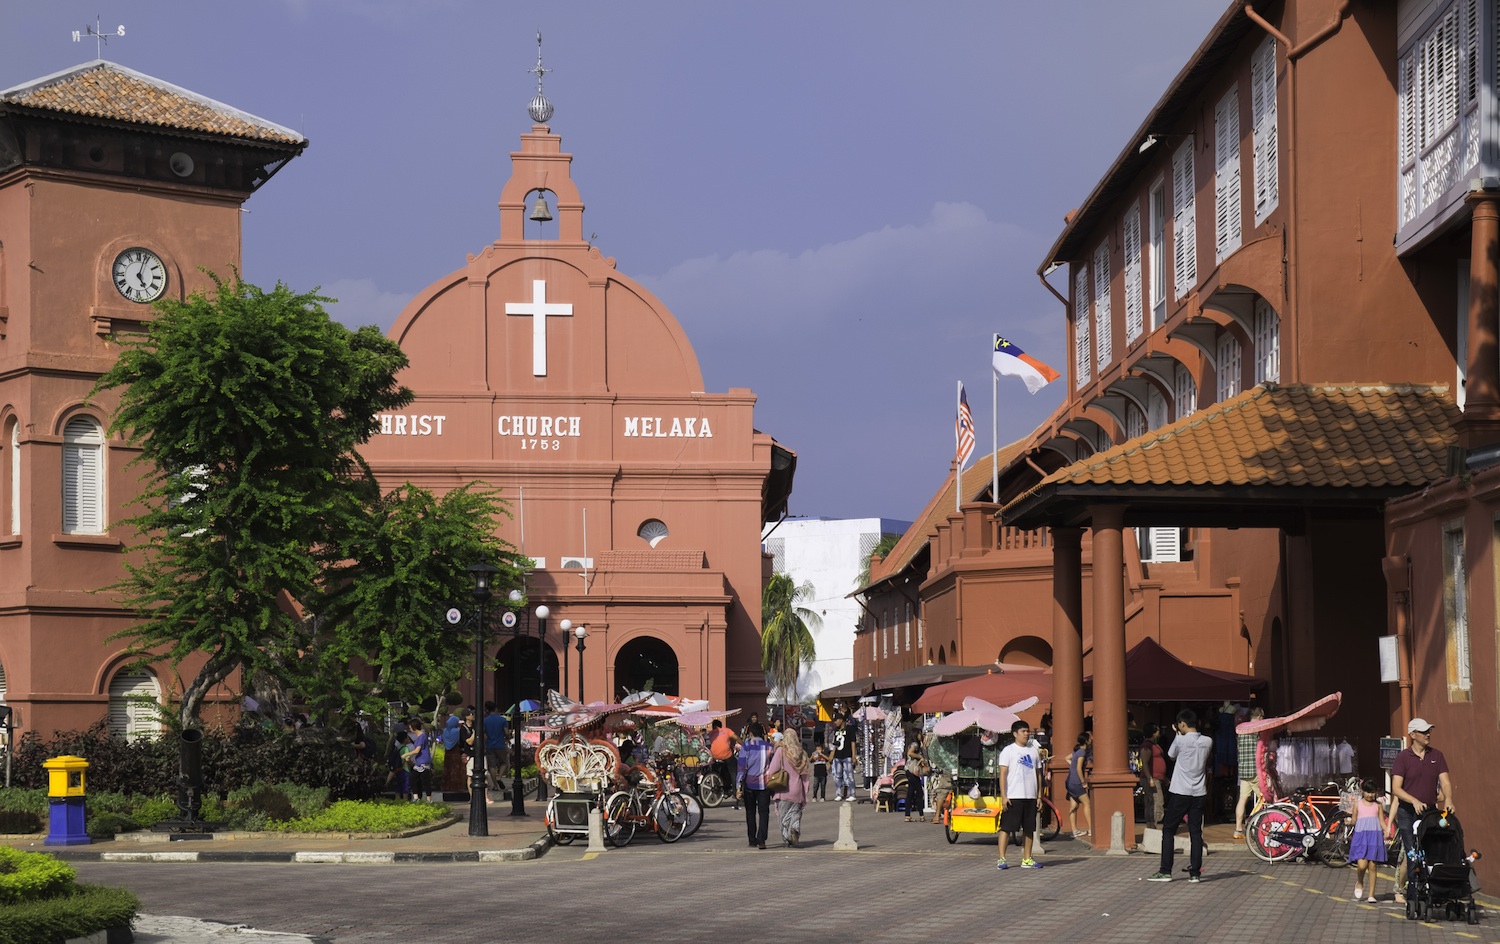 Christ Church in Melaka's town square © John Woodworth / Getty Images